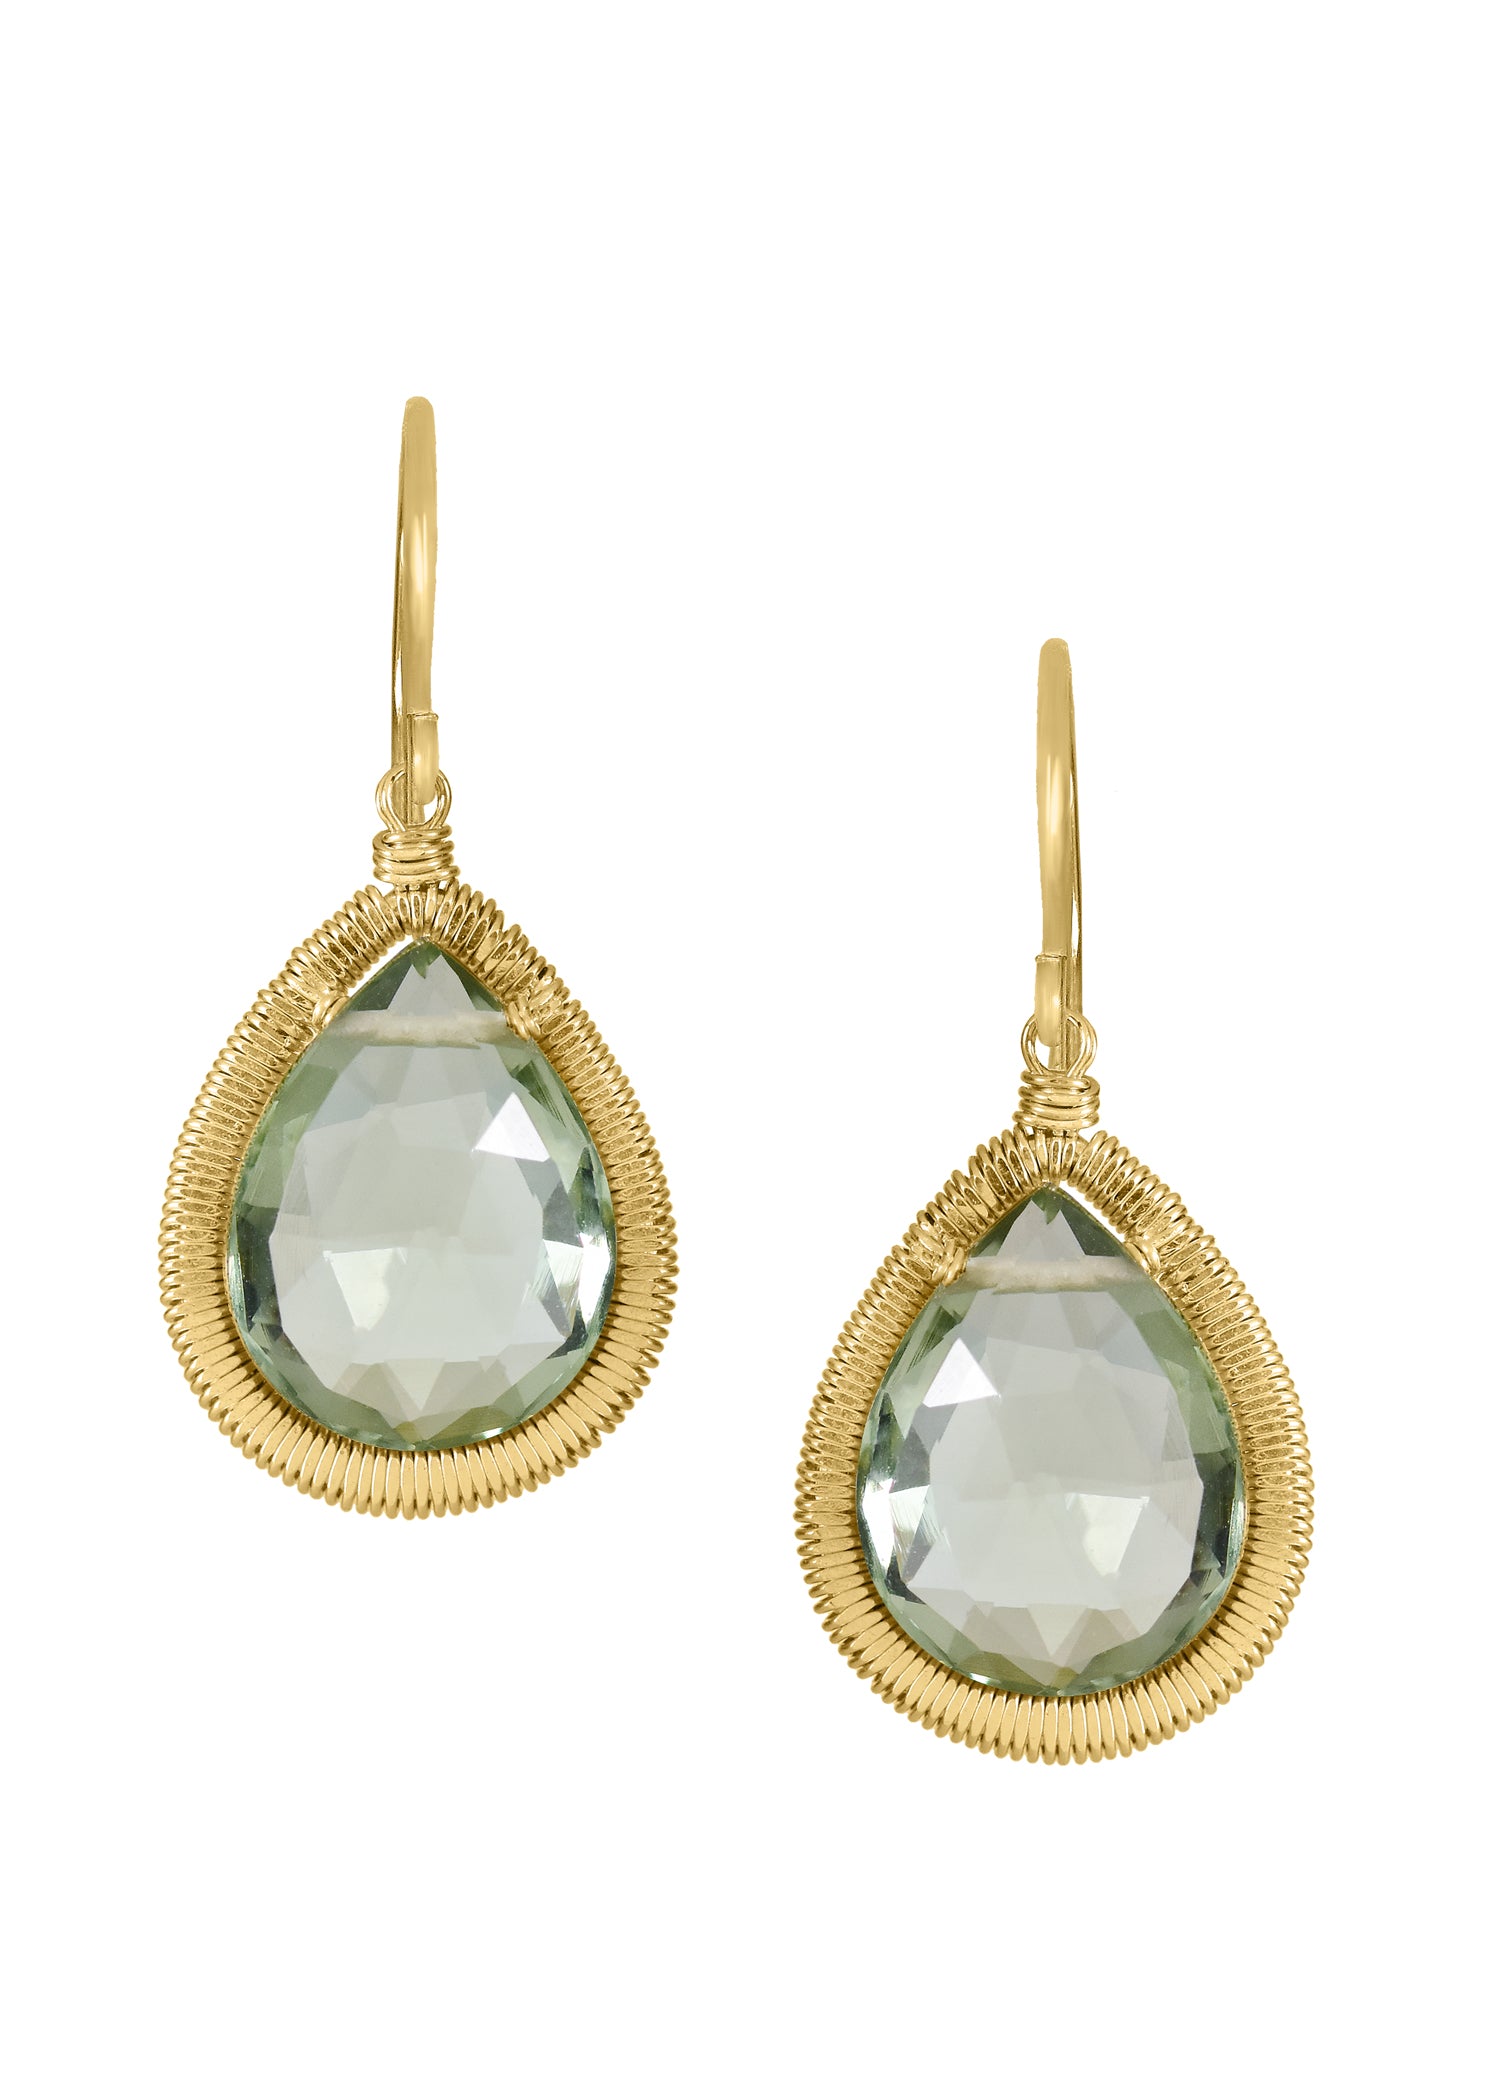 Green quartz 14k gold fill Earrings measure 1" in length (including the ear wires) and 1/2" in width at the widest point Handmade in our Los Angeles studio